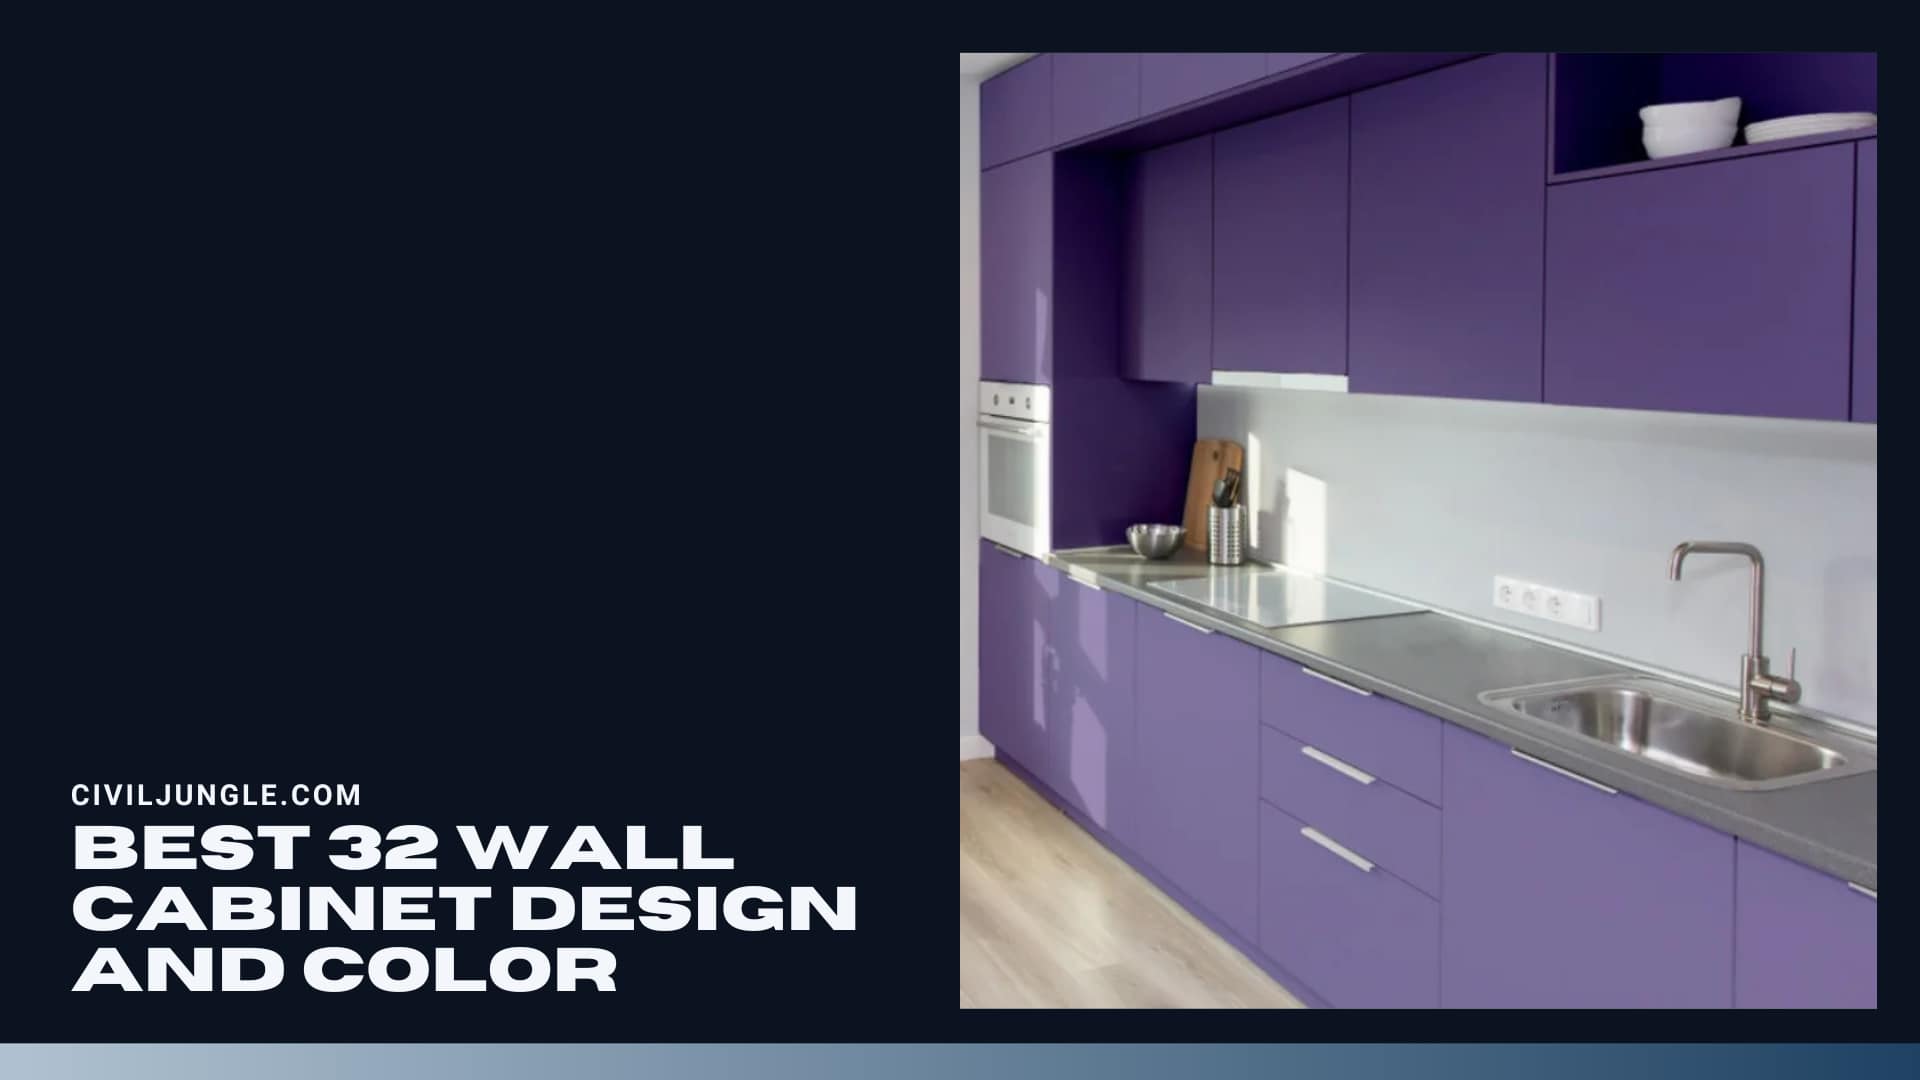 Best 32 Wall Cabinet Design and color